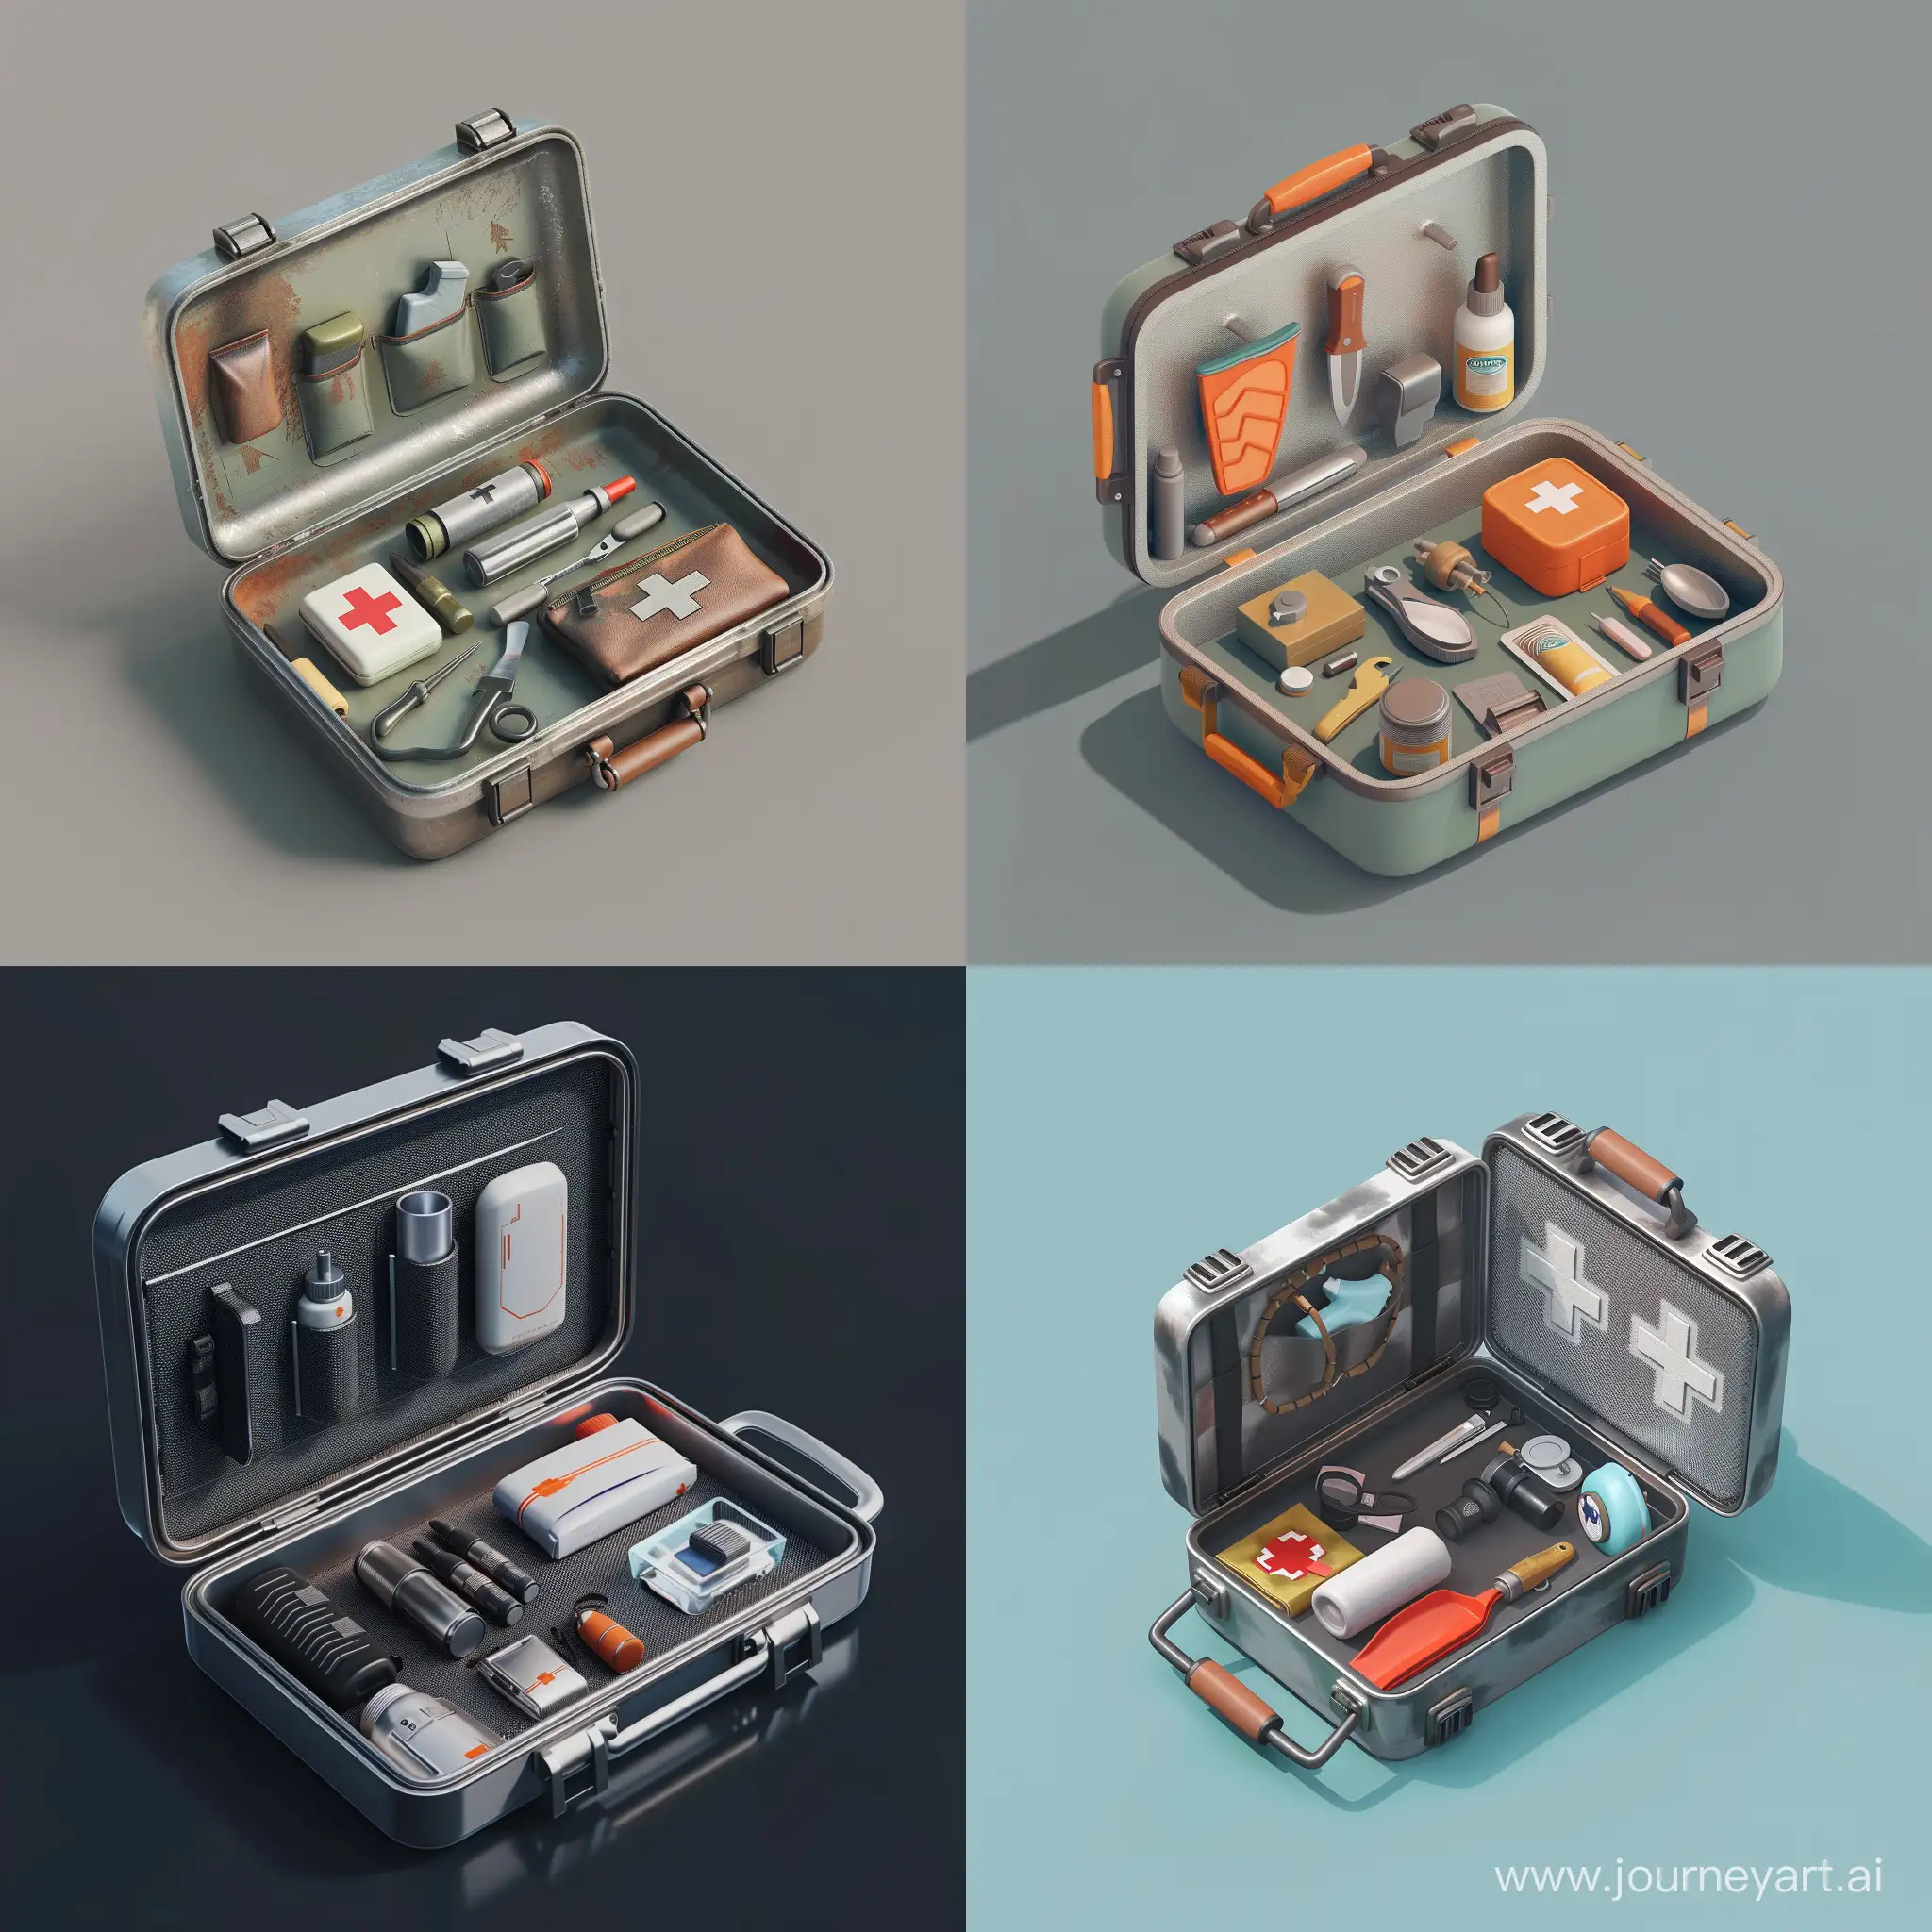 Isometric-Realistic-Mini-Survival-Kit-in-Metal-Case-Stalker-Style-First-Aid-and-Hygiene-Essentials